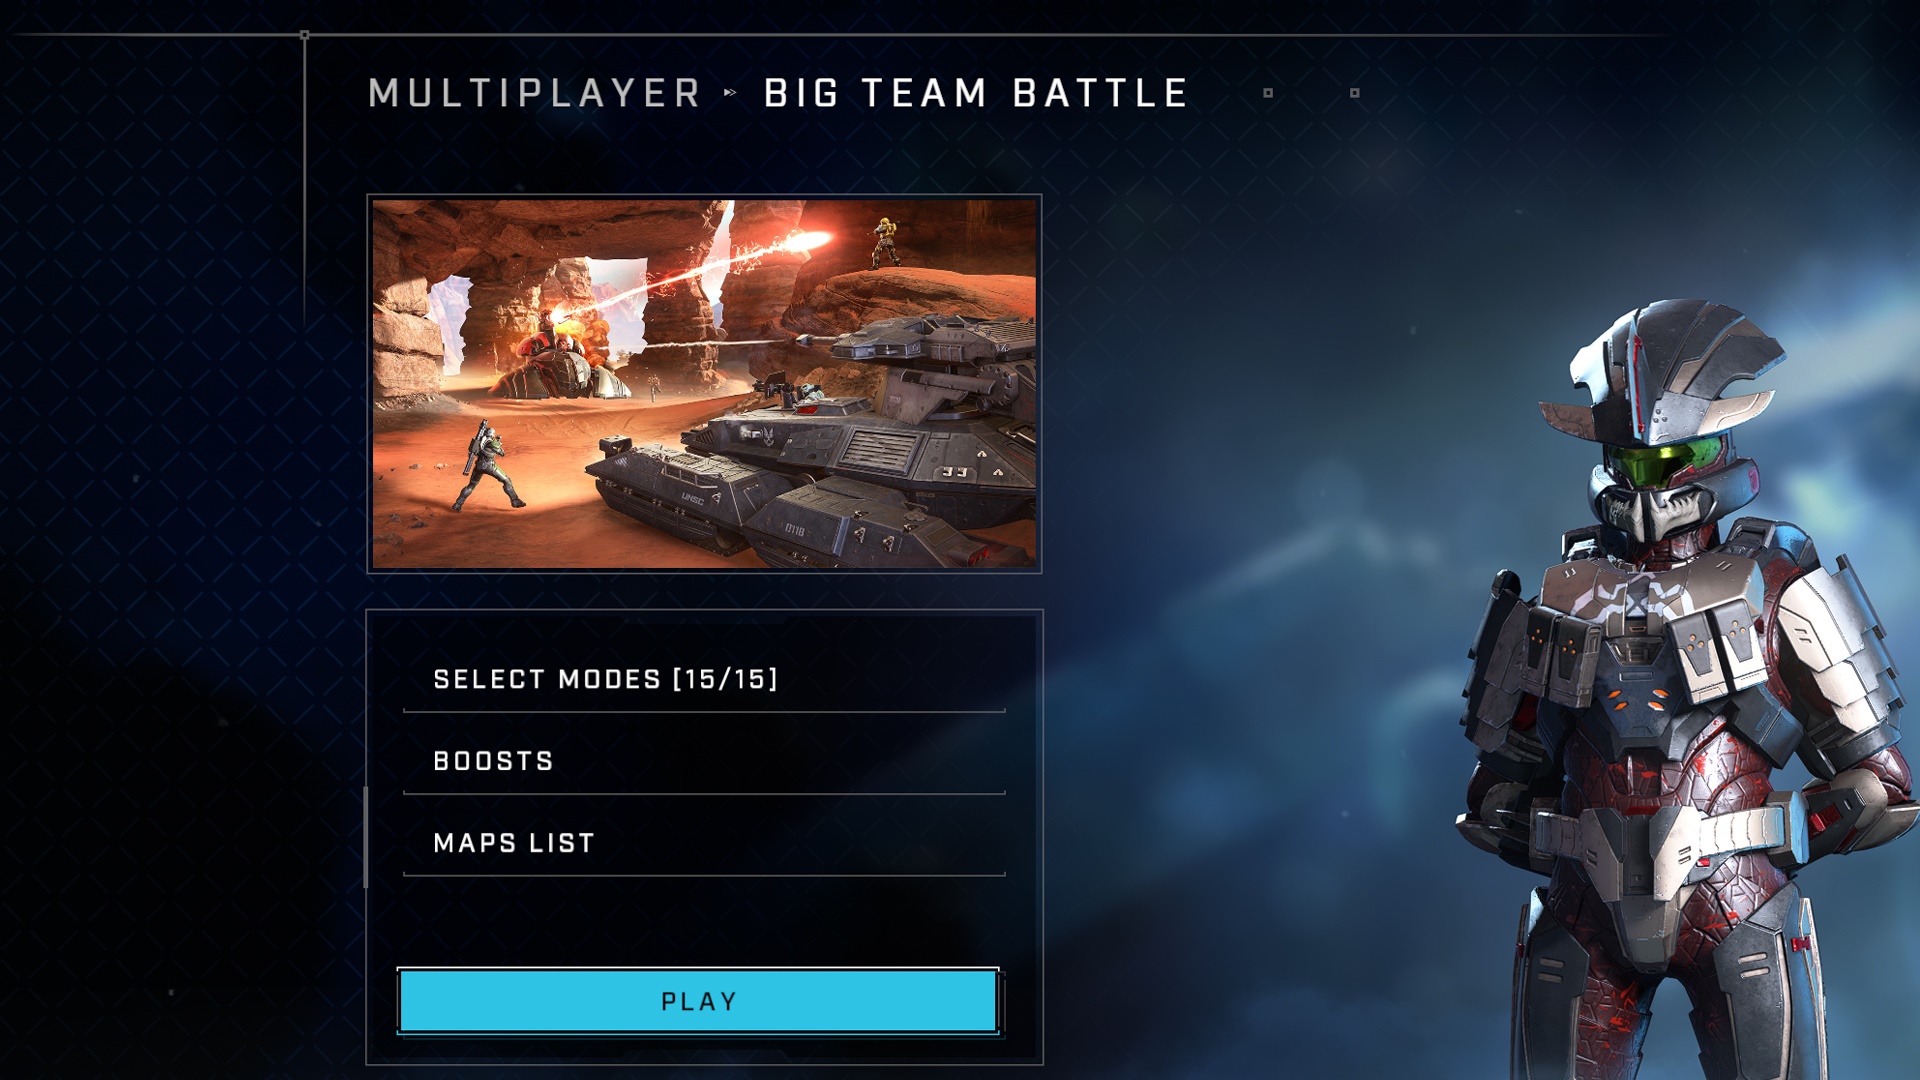 Halo Infinite Match Composer screenshot for BTB showing number of modes selected